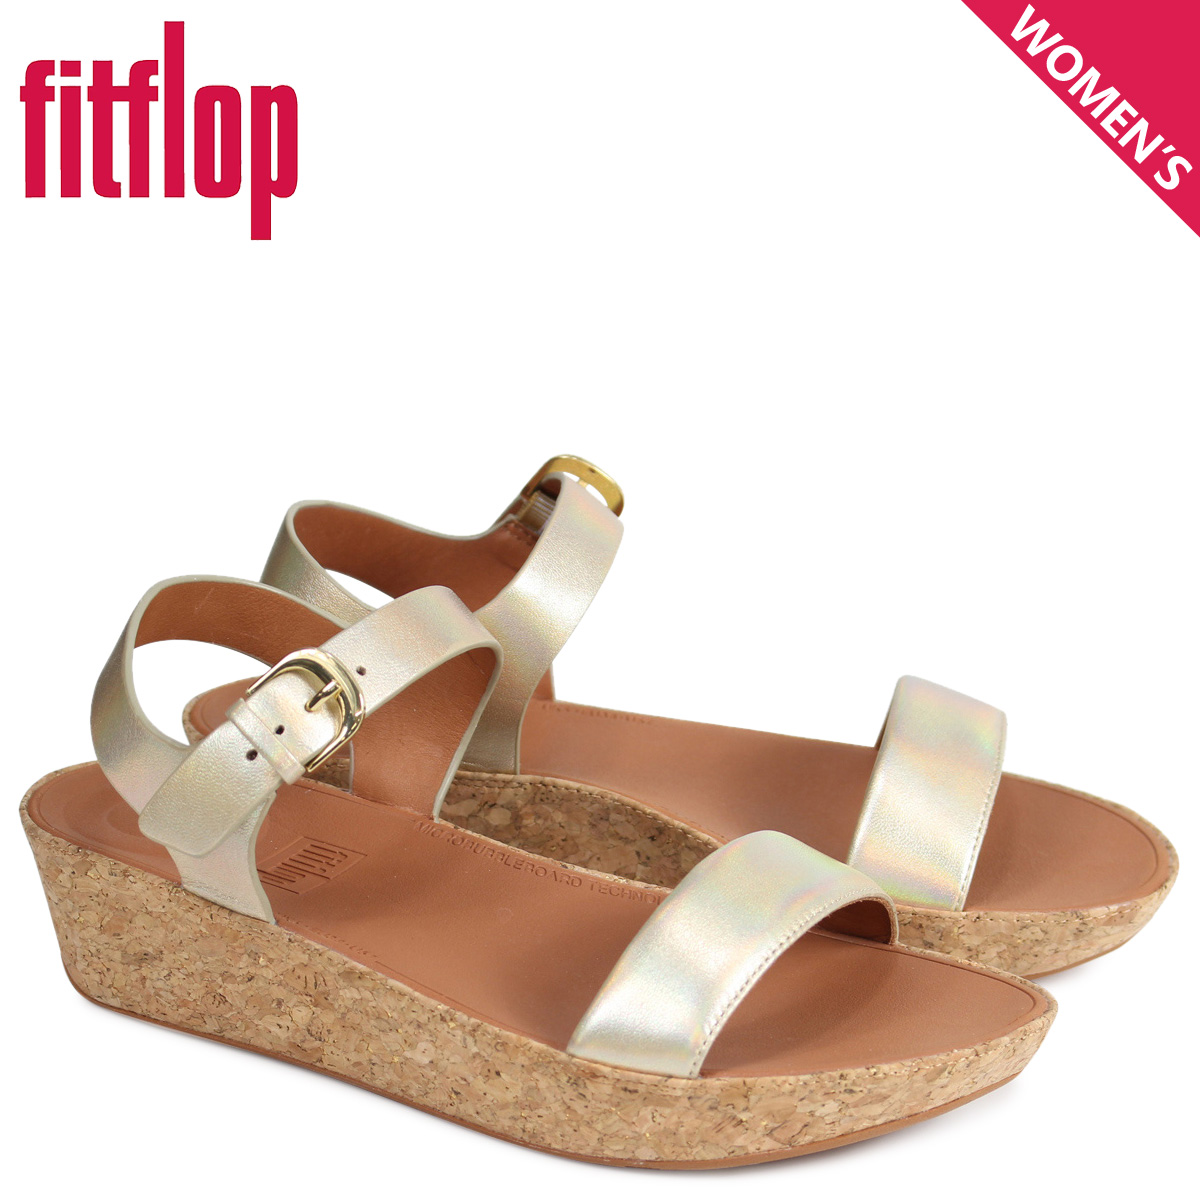 fitflop bon ii review